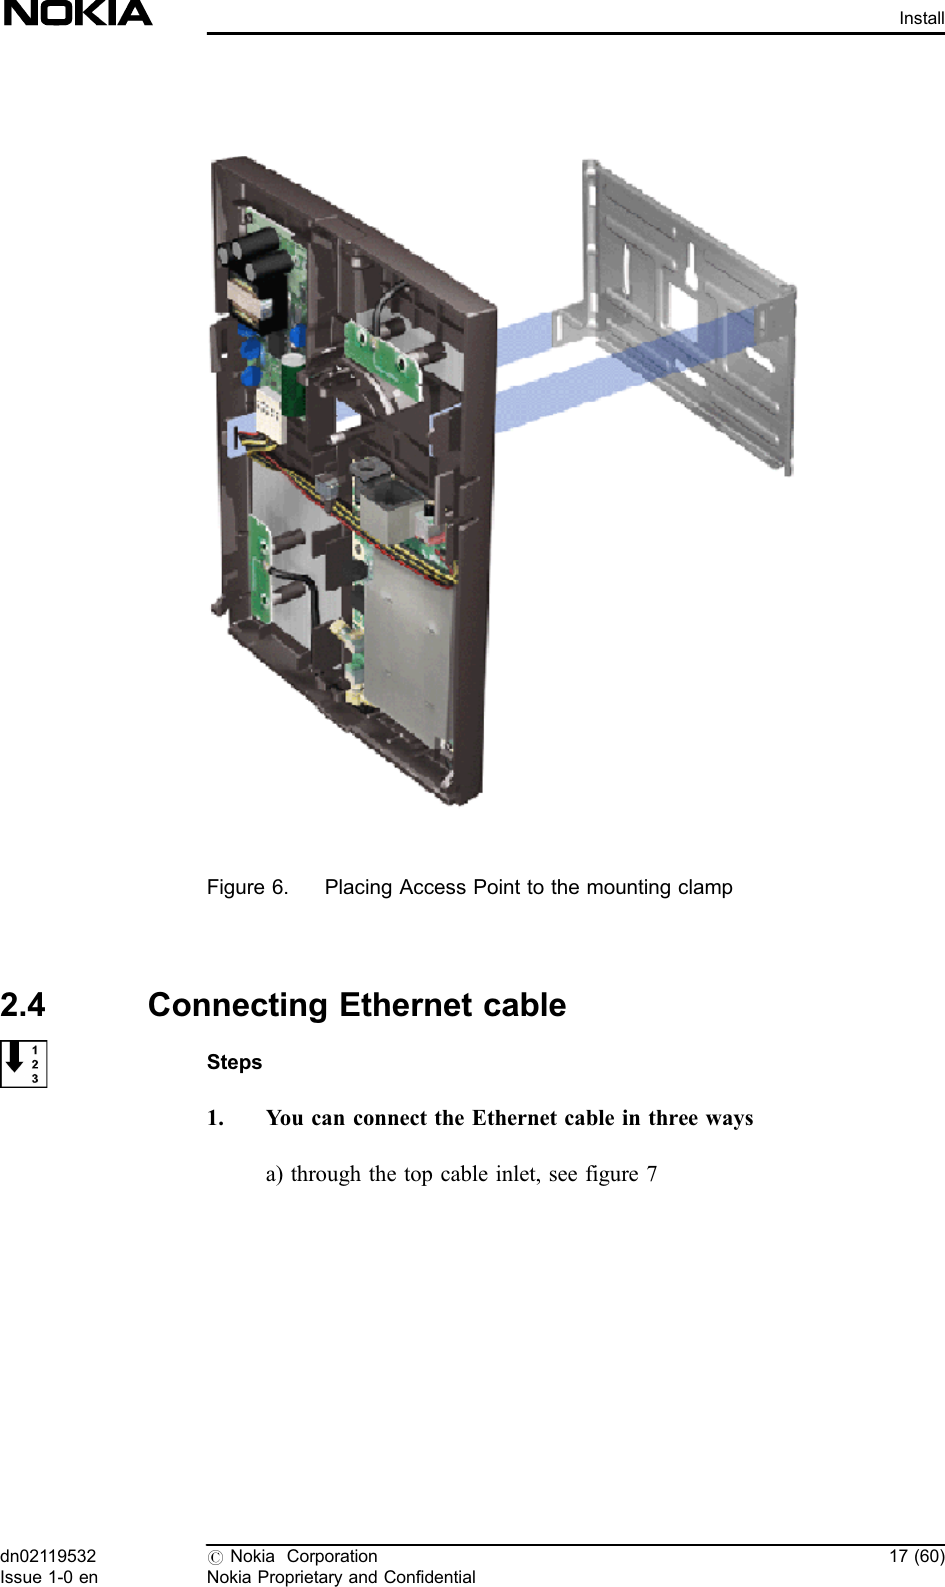 Figure 6. Placing Access Point to the mounting clamp2.4 Connecting Ethernet cableSteps1. You can connect the Ethernet cable in three waysa) through the top cable inlet, see figure 7dn02119532Issue 1-0 en#Nokia CorporationNokia Proprietary and Confidential17 (60)Install